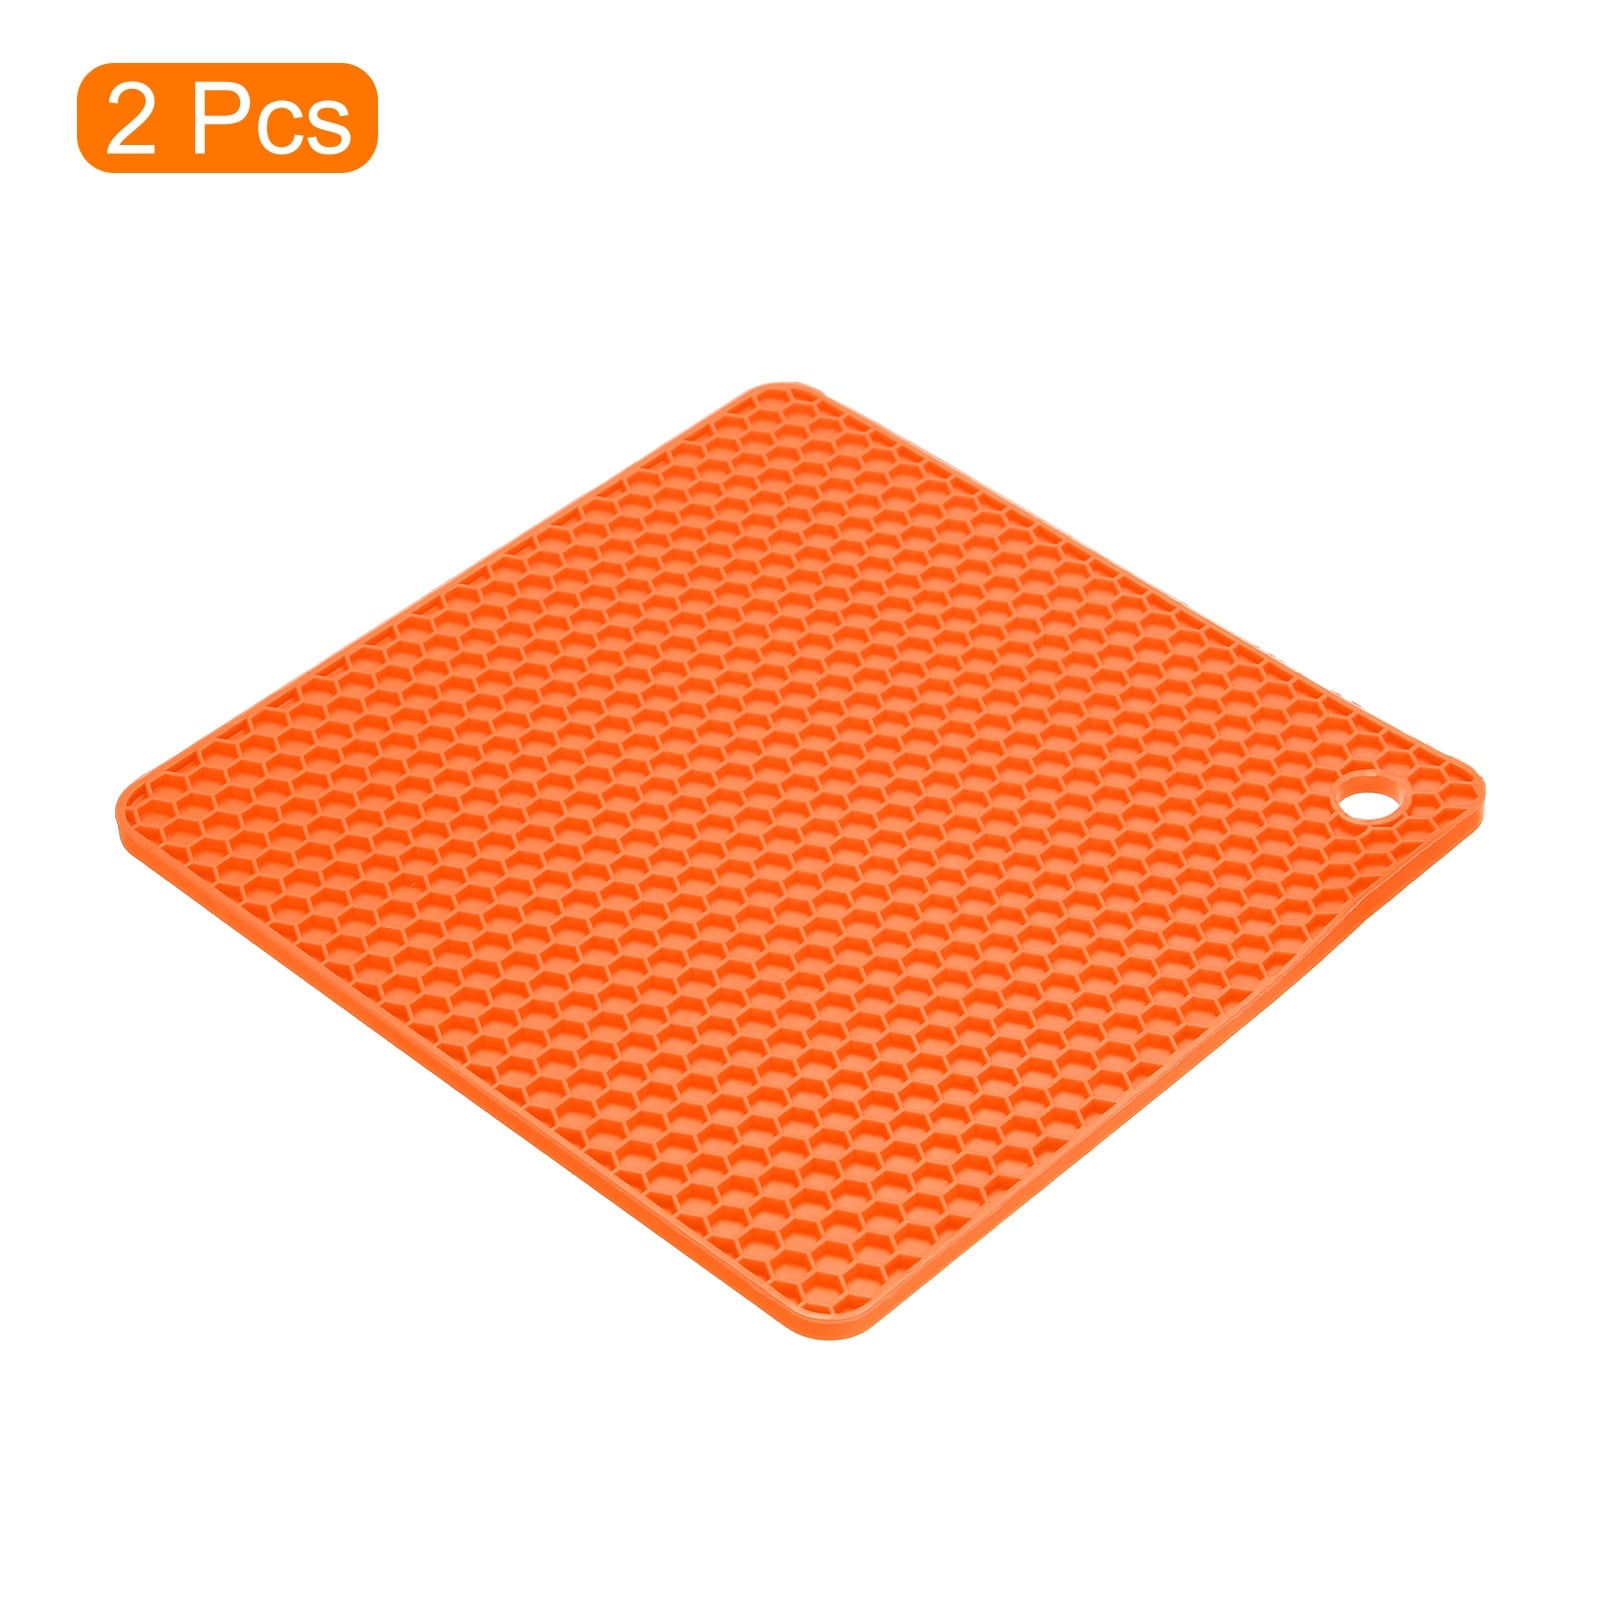 Silicone Placemats - Silicone Oven Mitts and Pot Holders Sets, Silicone  Trivet Mats Heat Resistant Silicone Oven Mittens Mini Oven Gloves and Hot  Pads